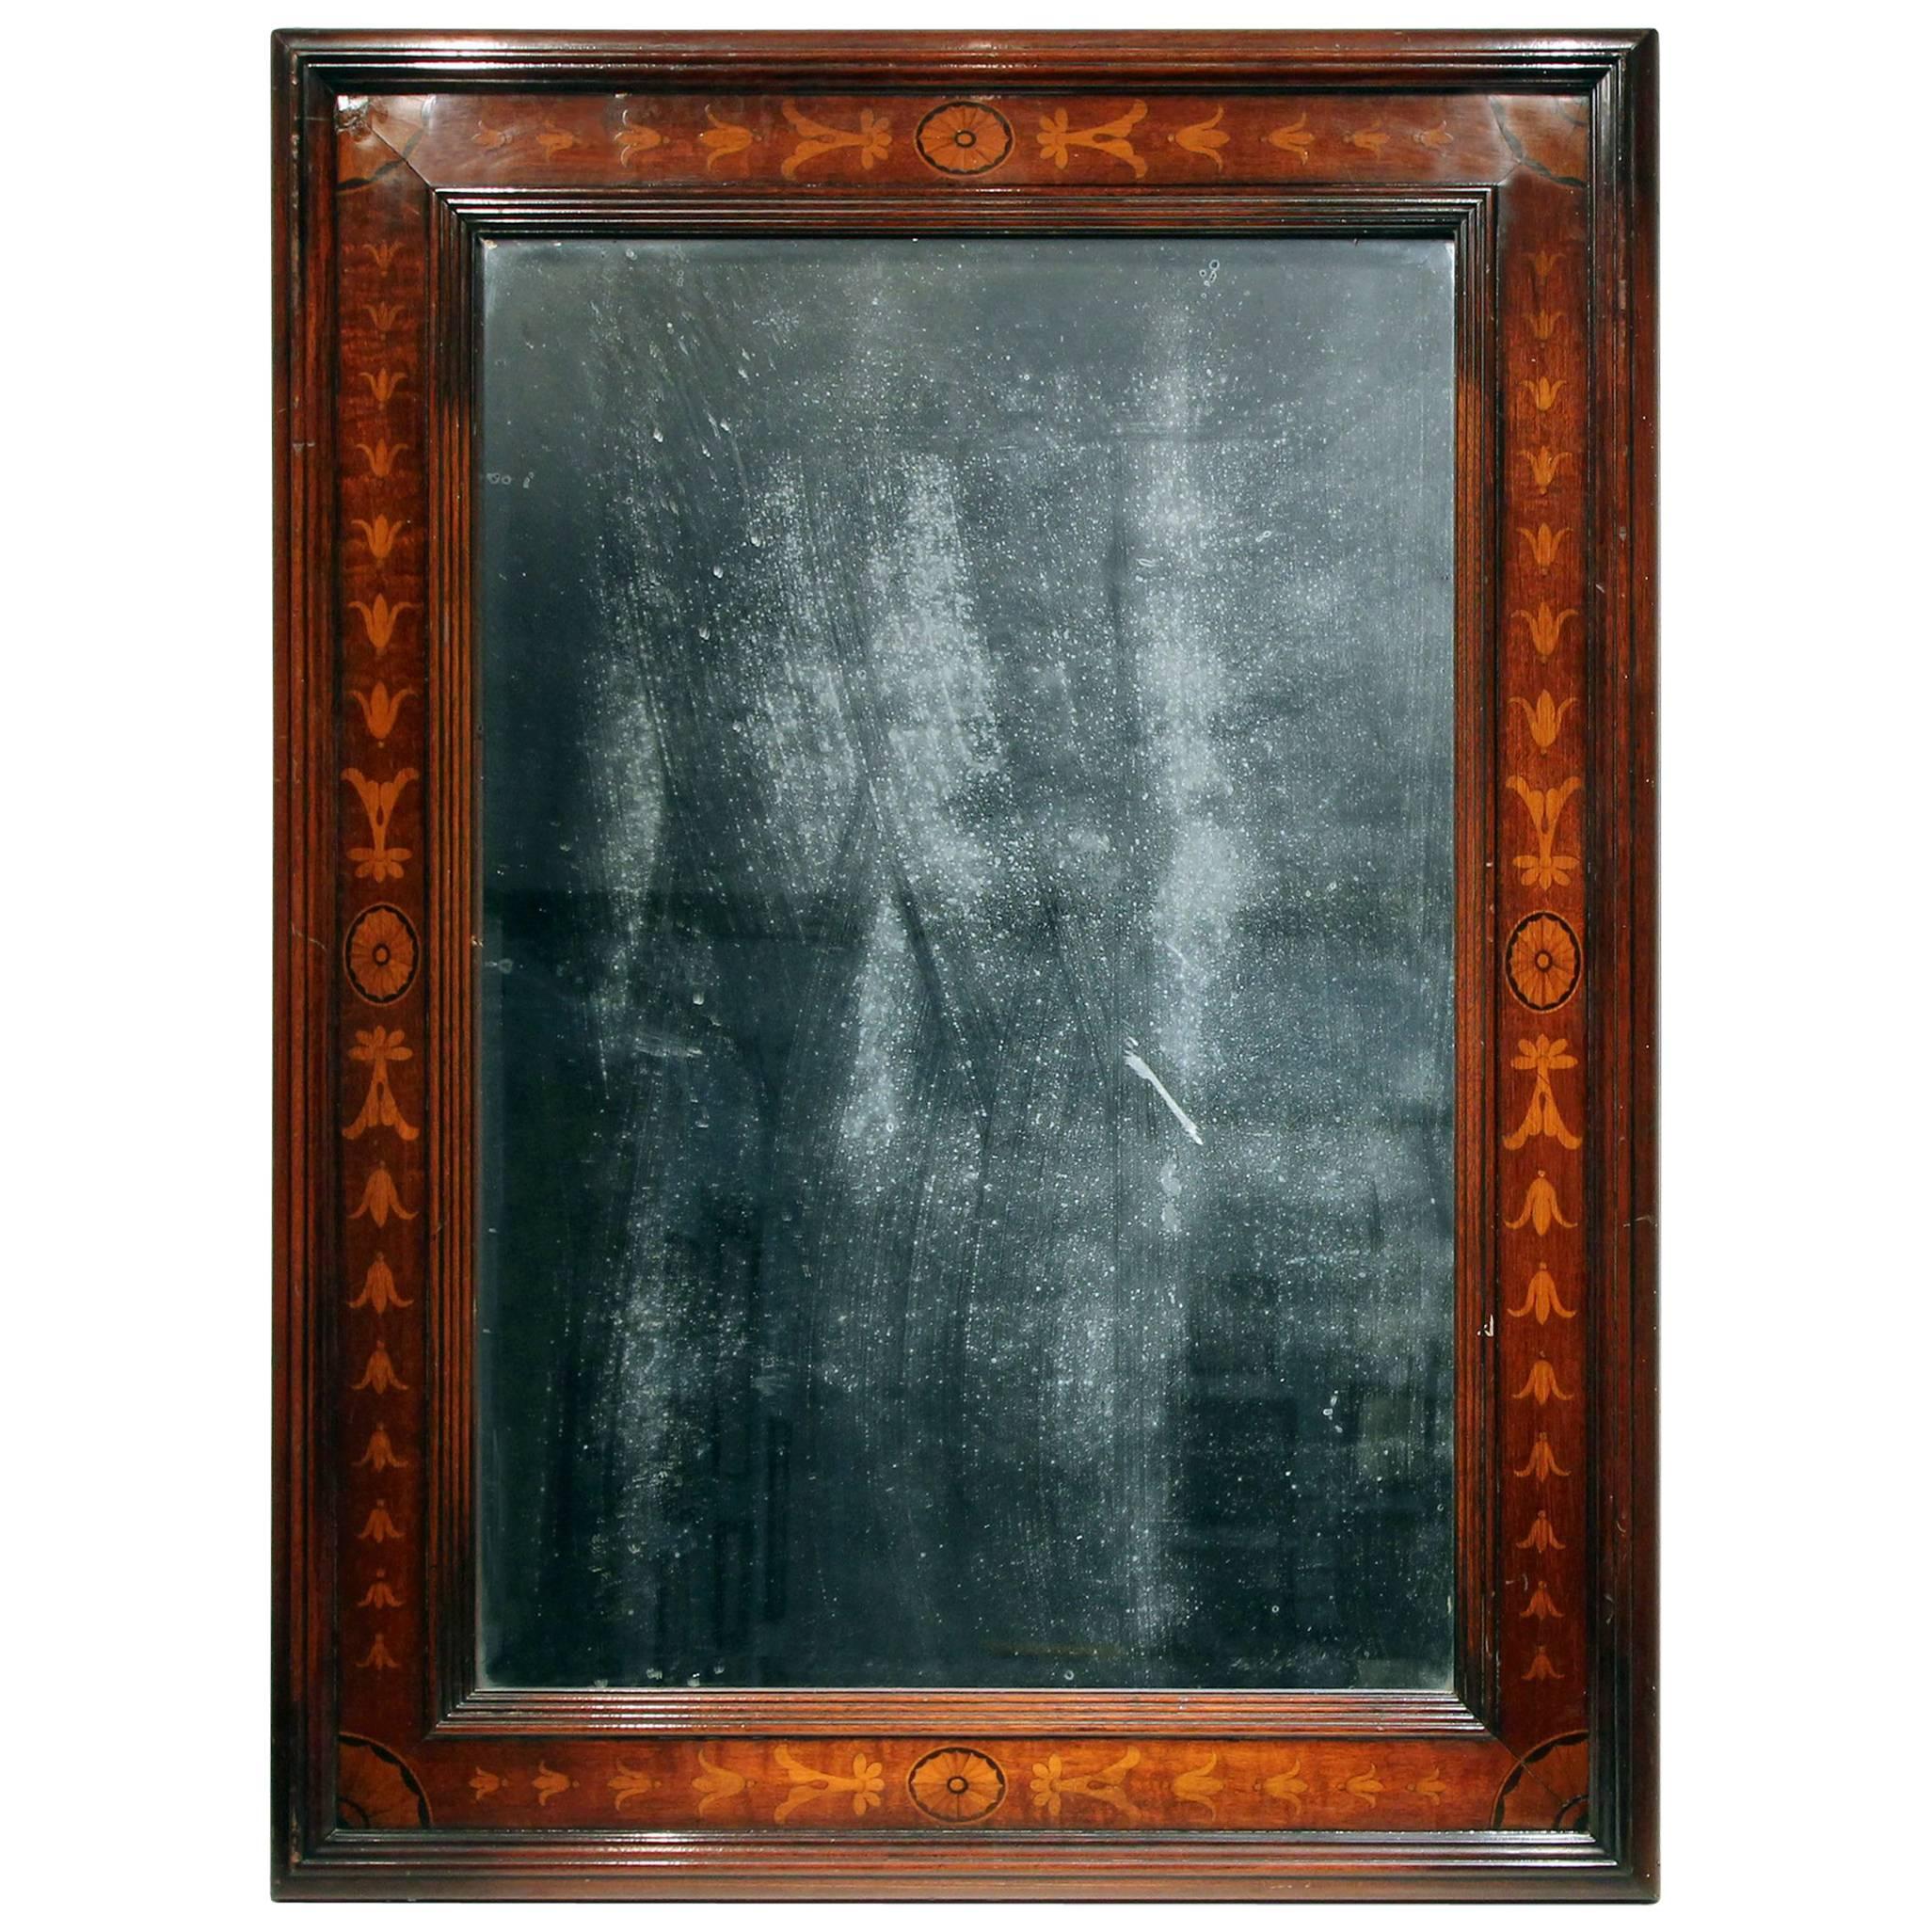 Large Inlaid Frame with Original Bevelled Mirror, Early 20th Century